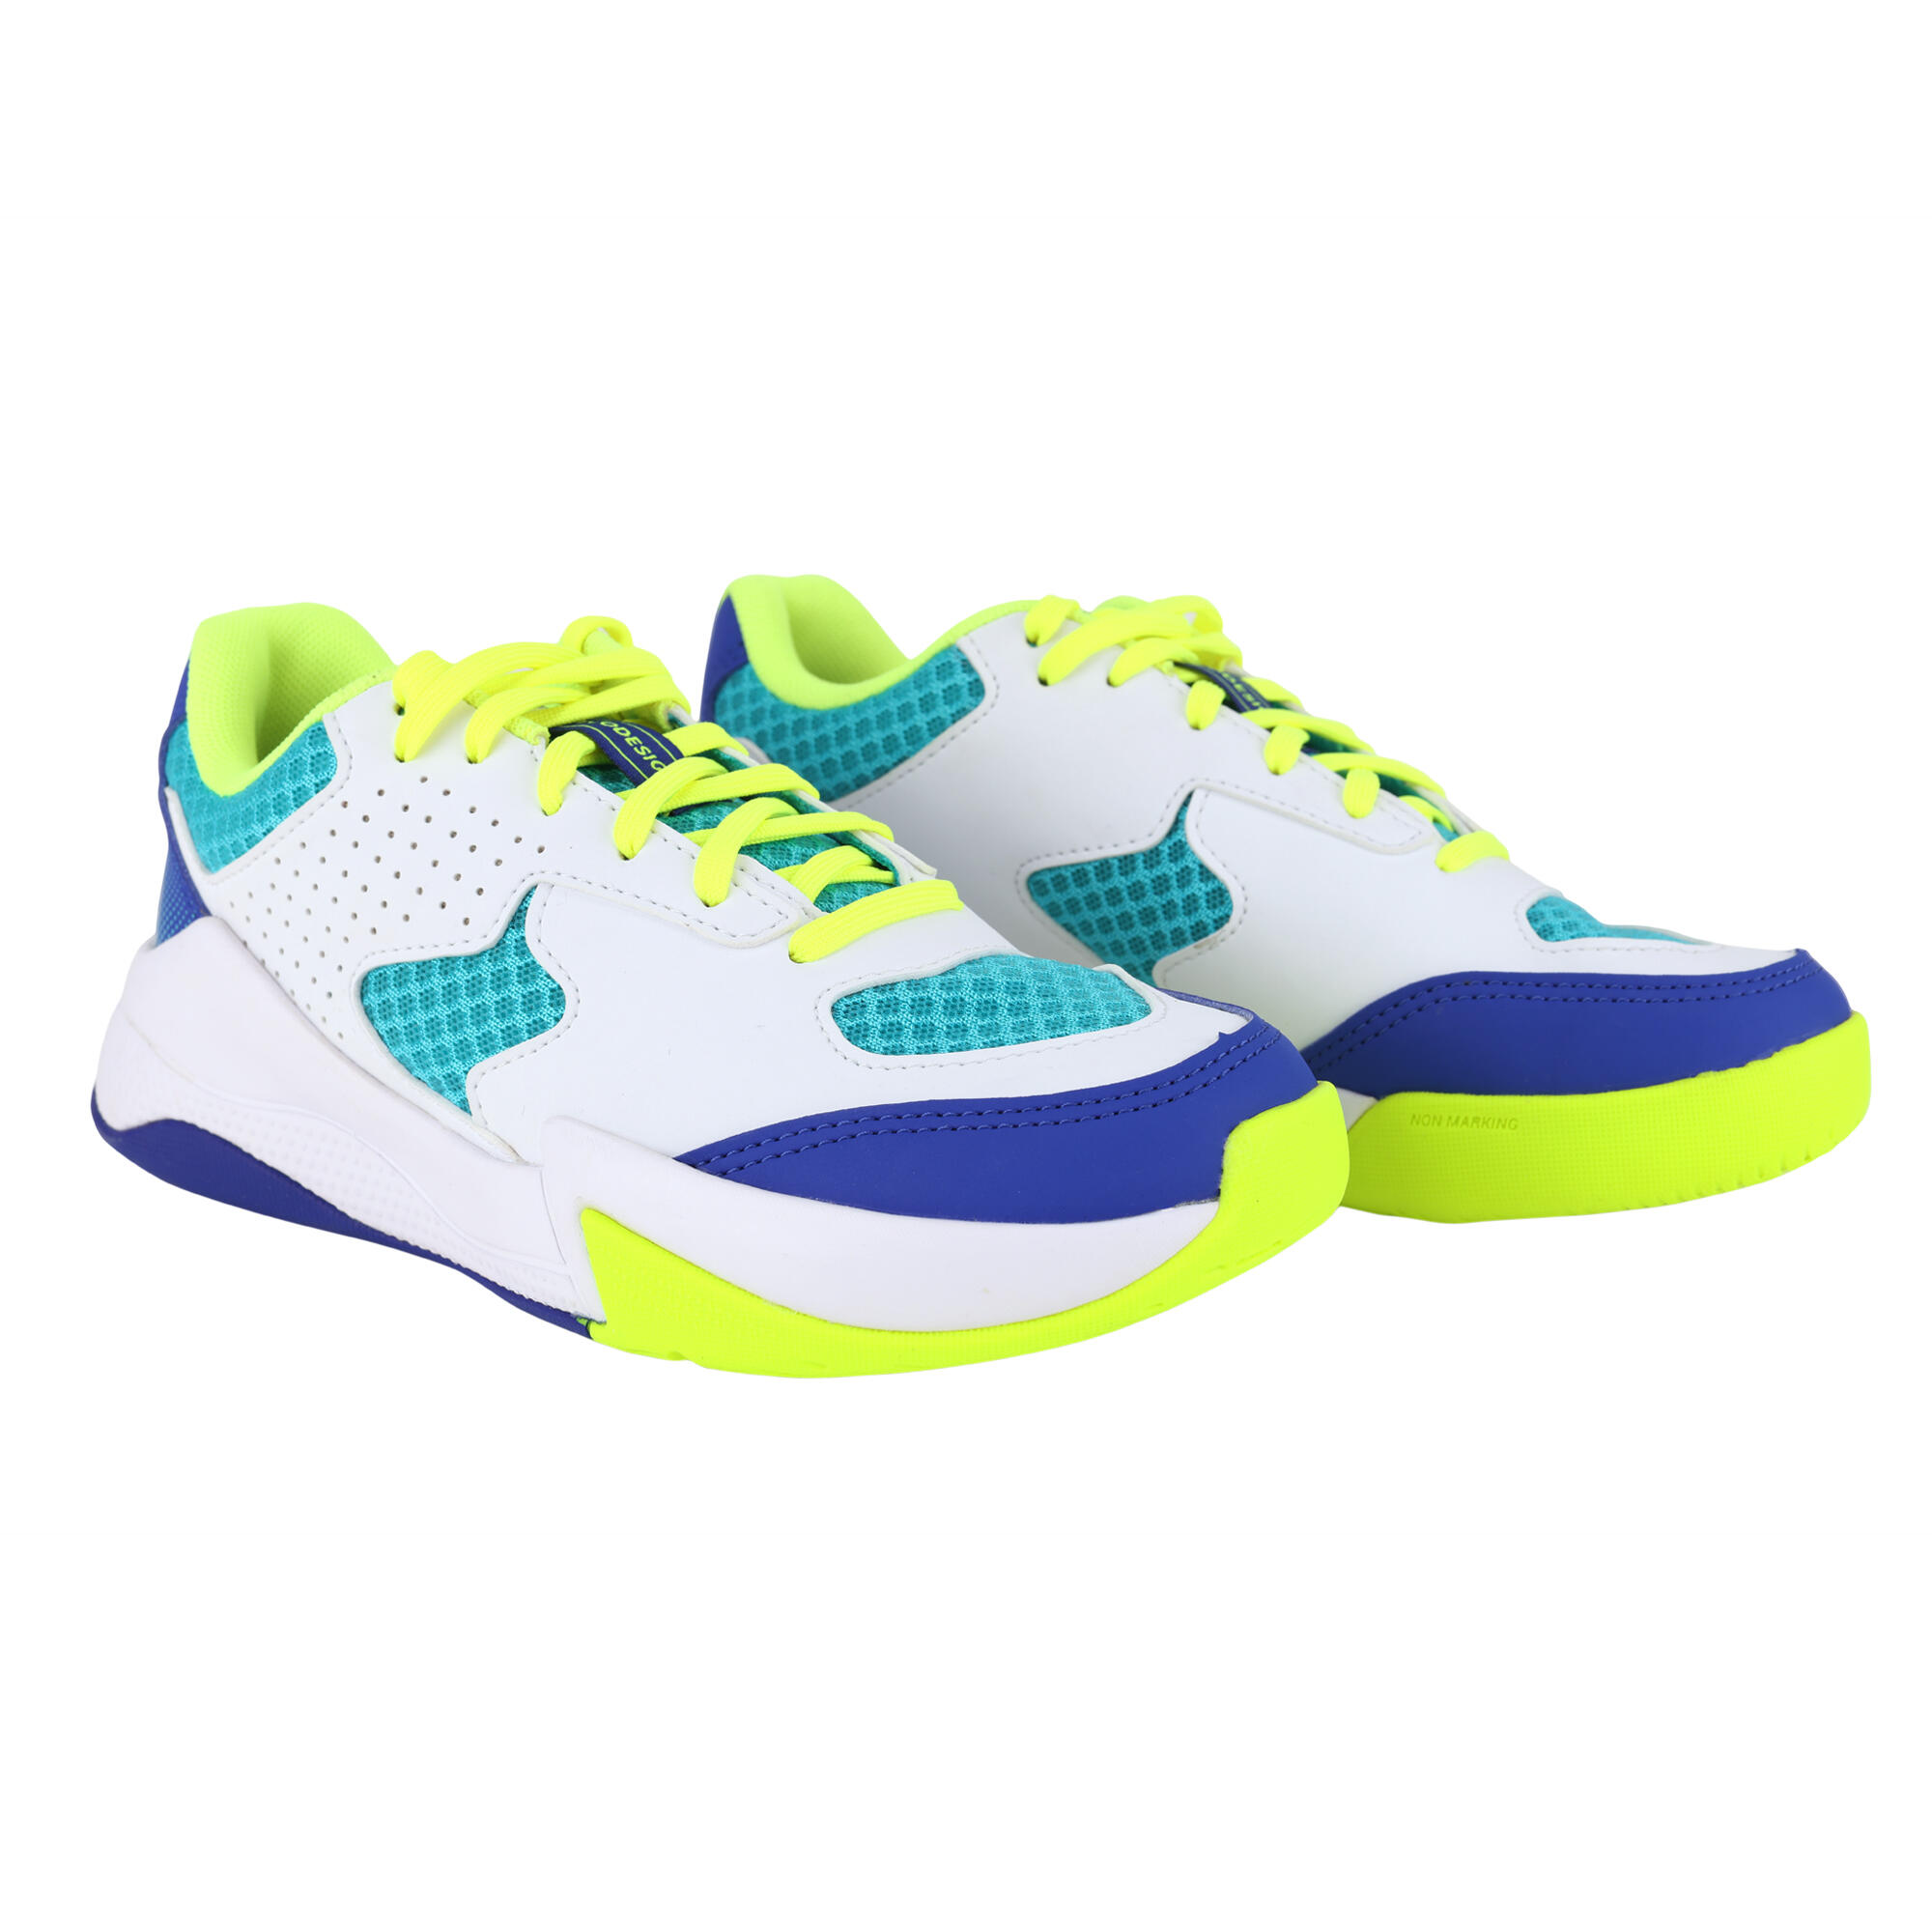 Volleyball Shoes VS100 Comfort With Laces - White/Blue & Green. 1/4